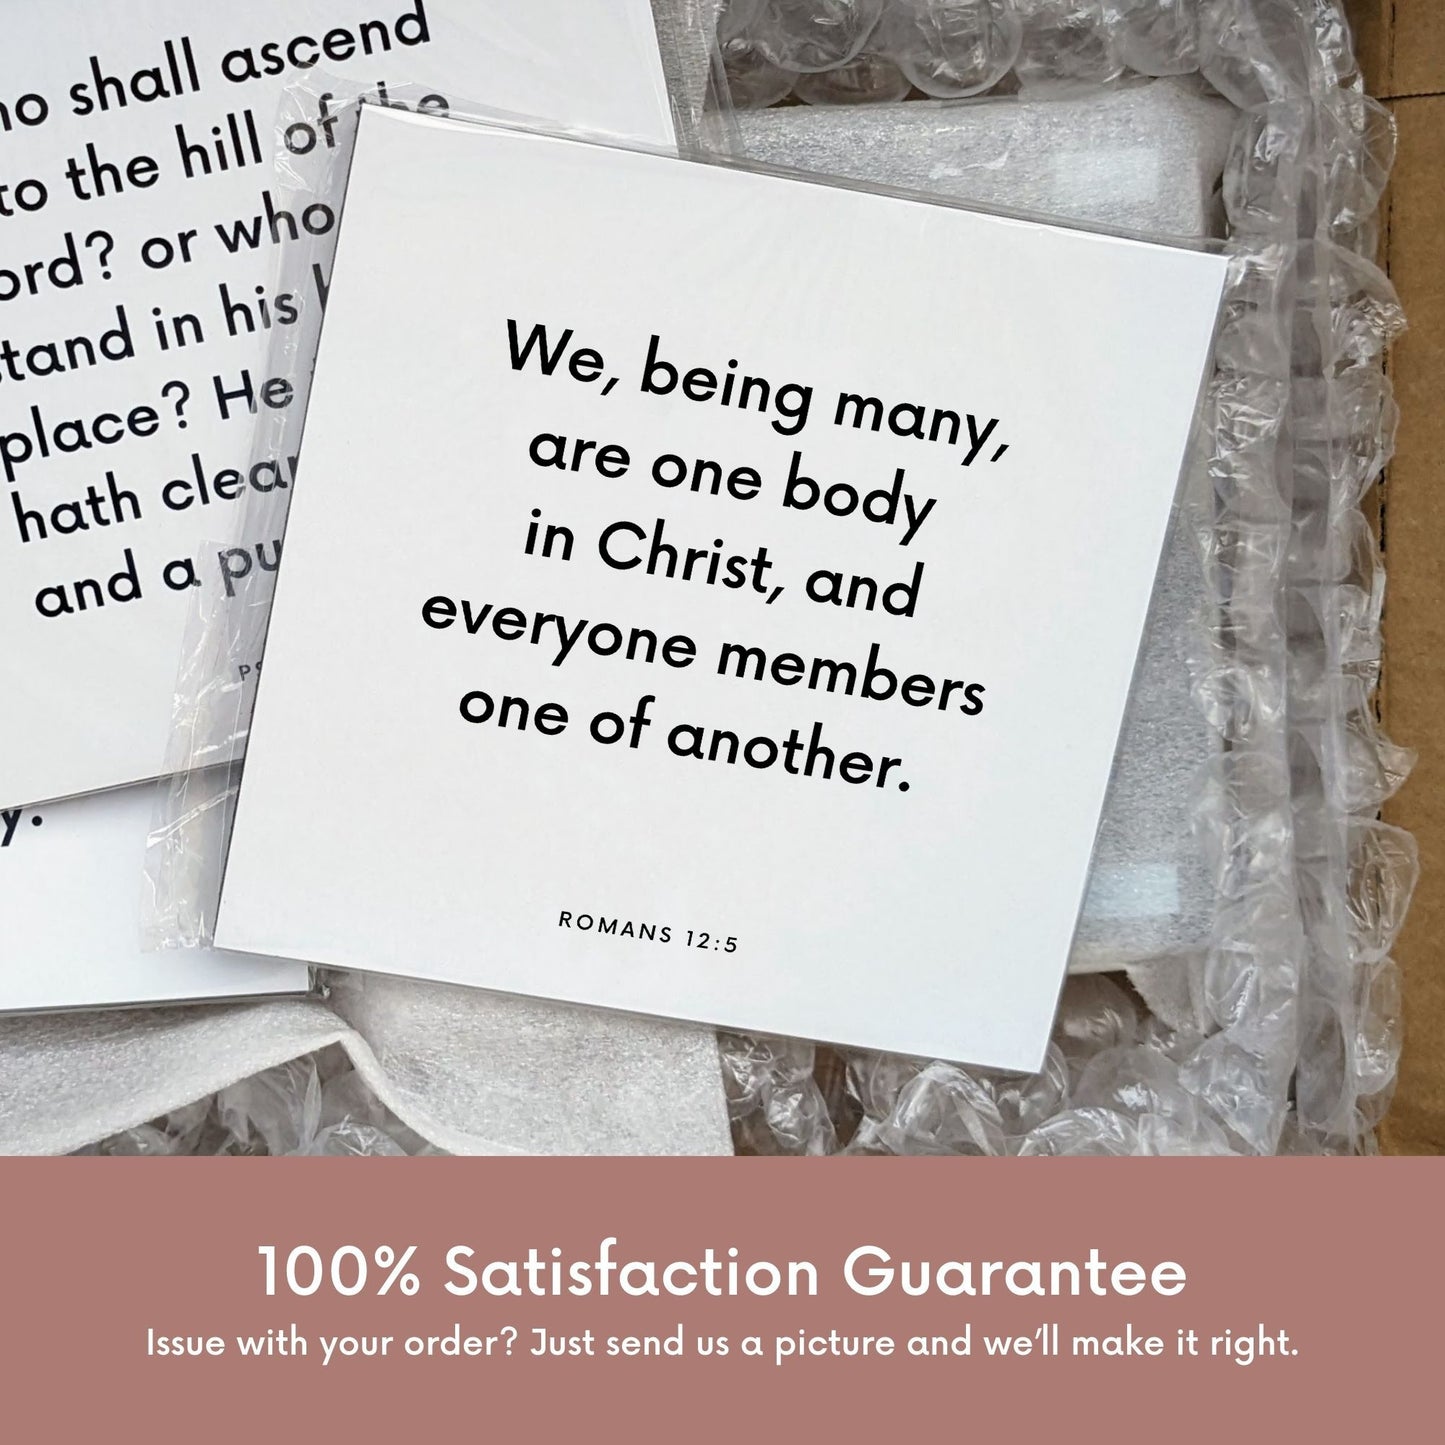 Shipping materials for scripture tile of Romans 12:5 - "We, being many, are one body in Christ"